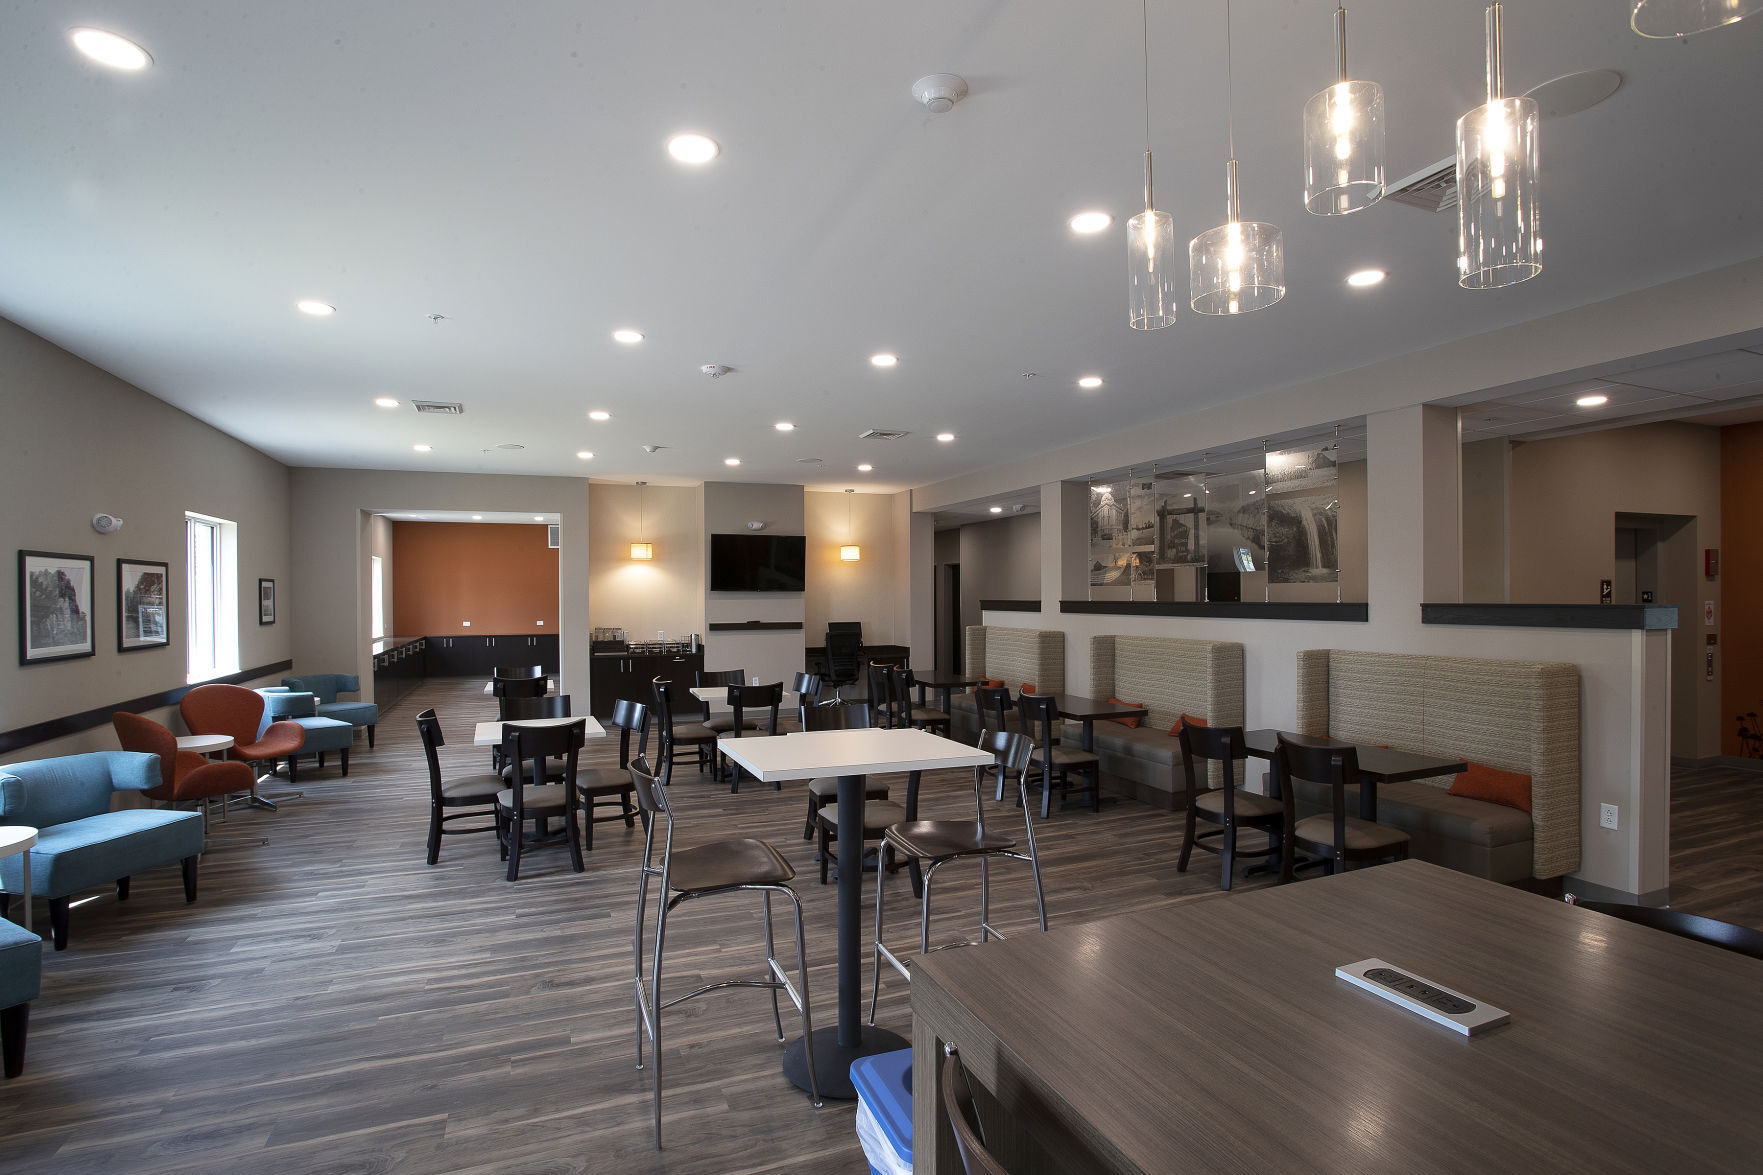 The dining and lounge area of the new Sleep Inn in Lancaster, WI., on Tuesday, June 8, 2021. PHOTO CREDIT: Stephen Gassman